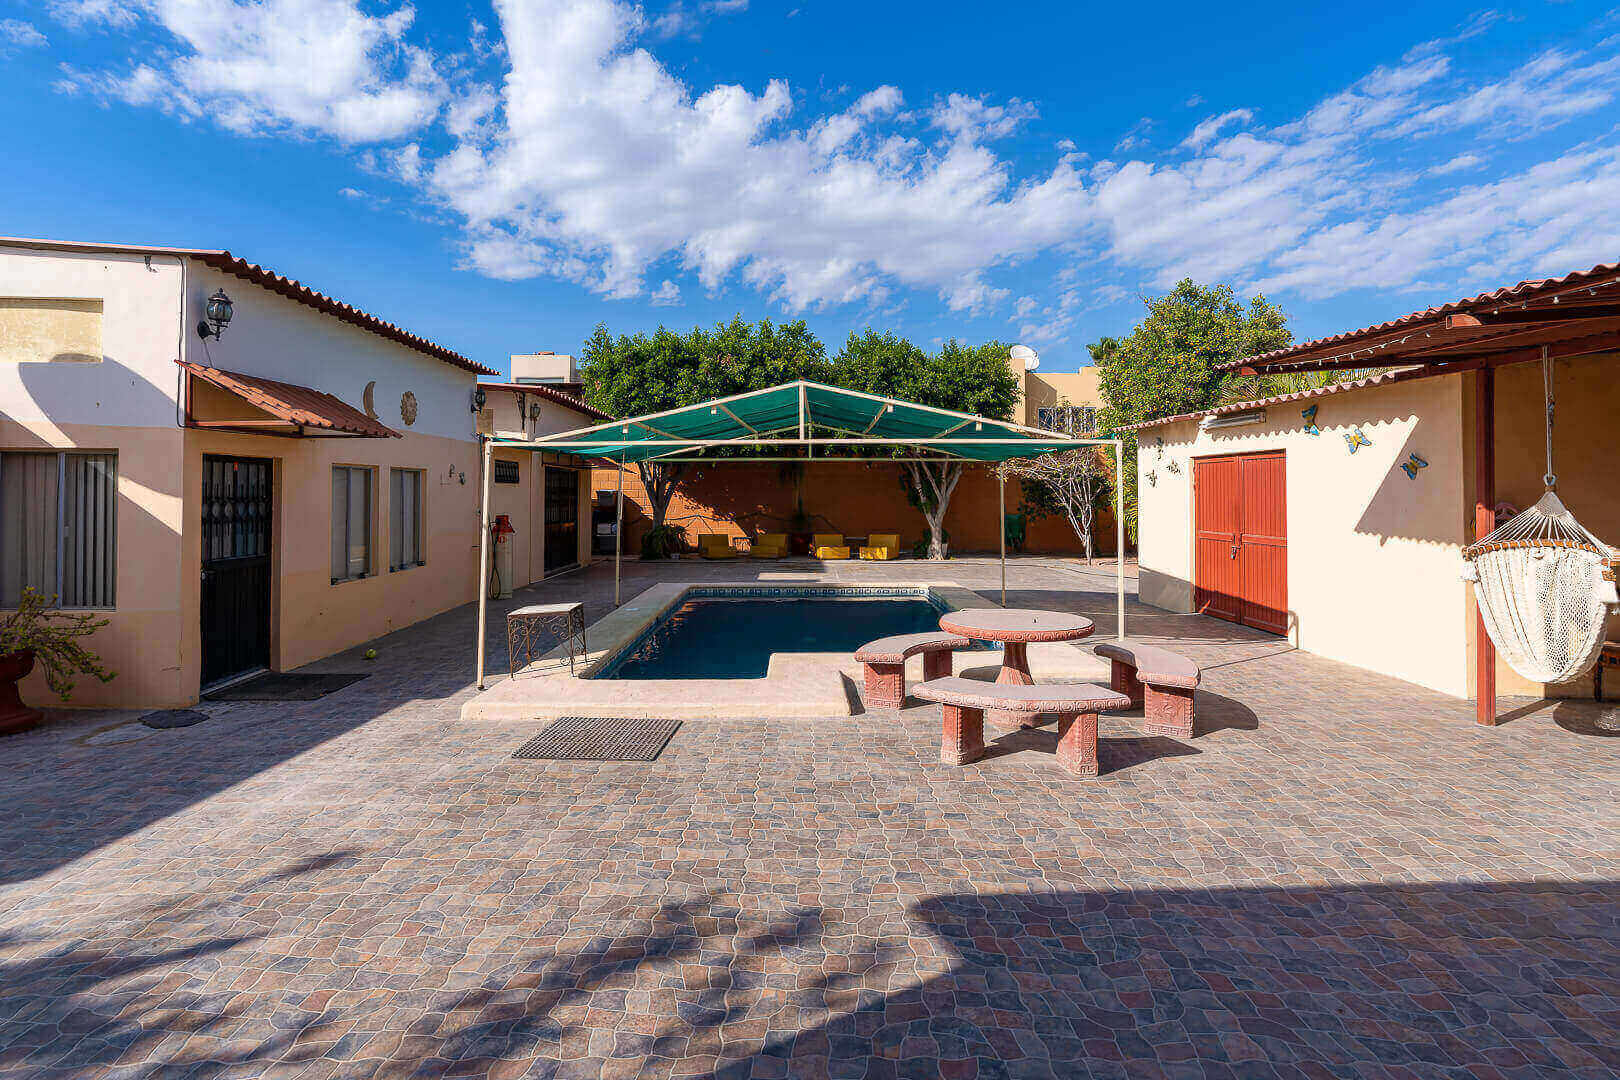 Nice home and great location in La Paz BCS!